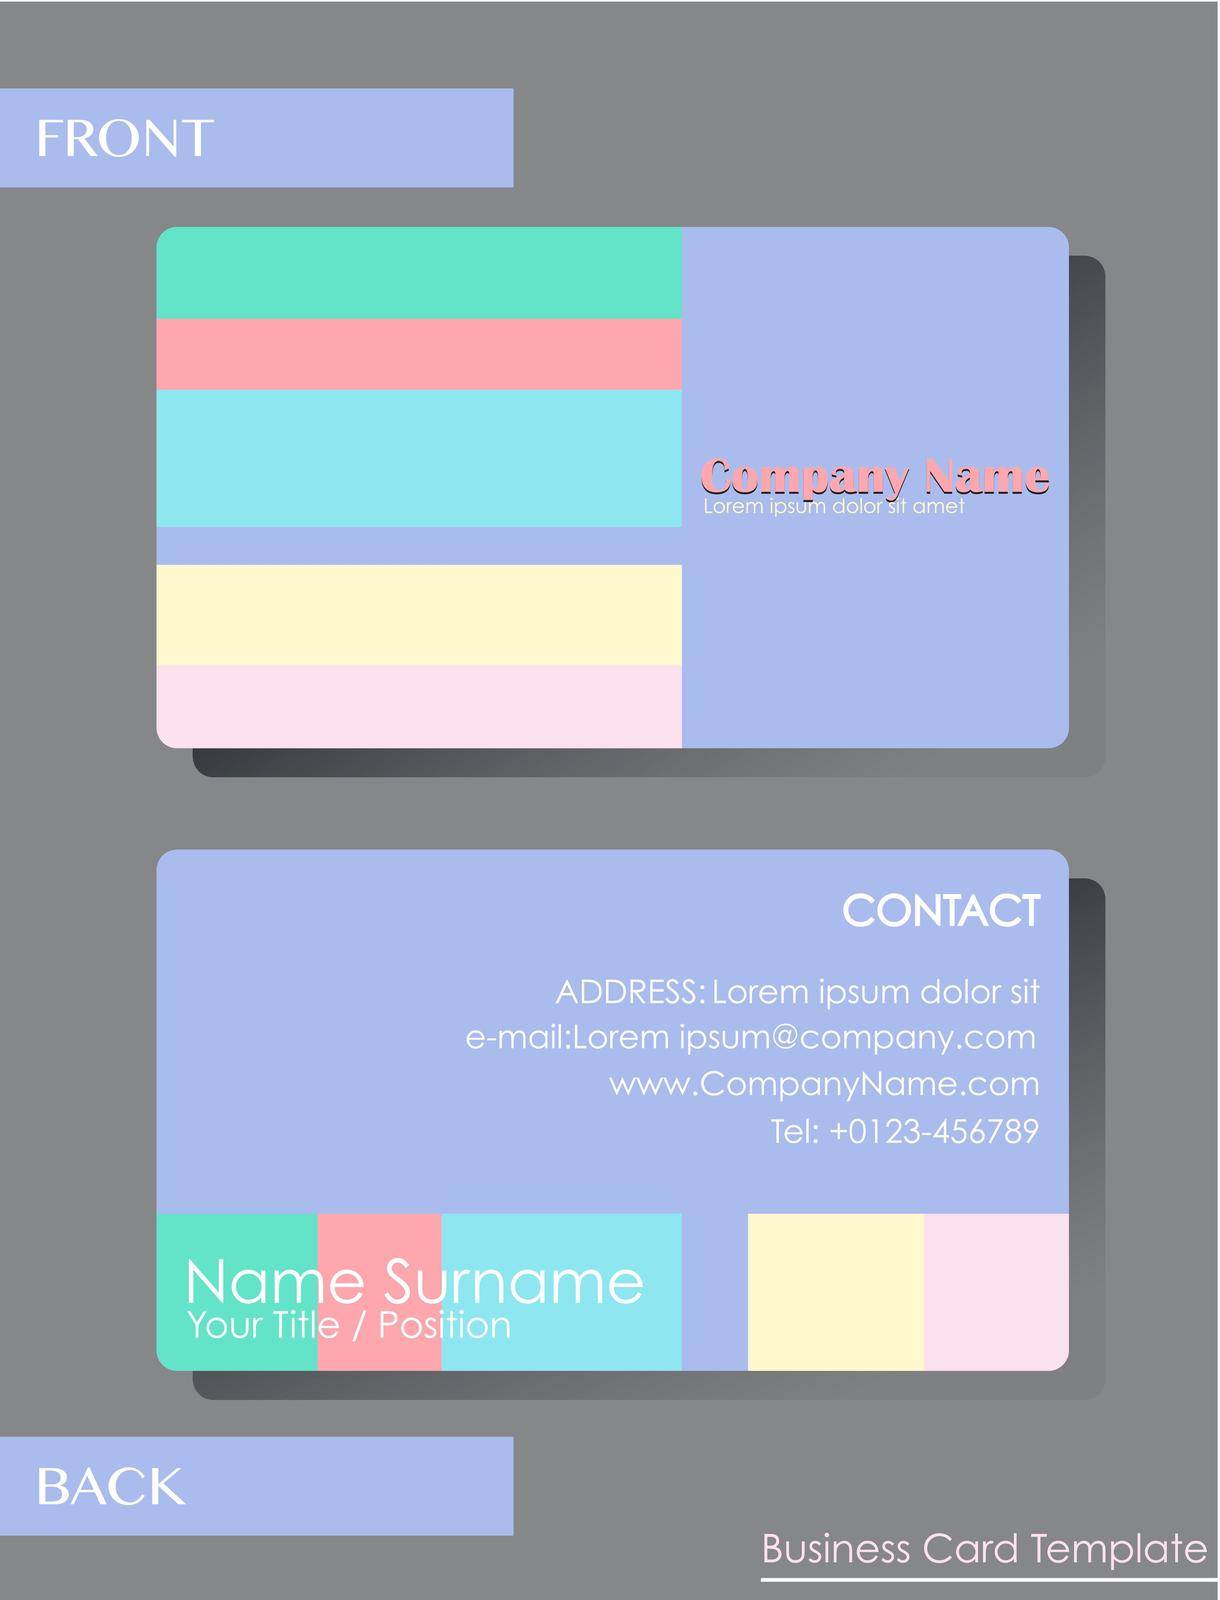 A colourful calling card template